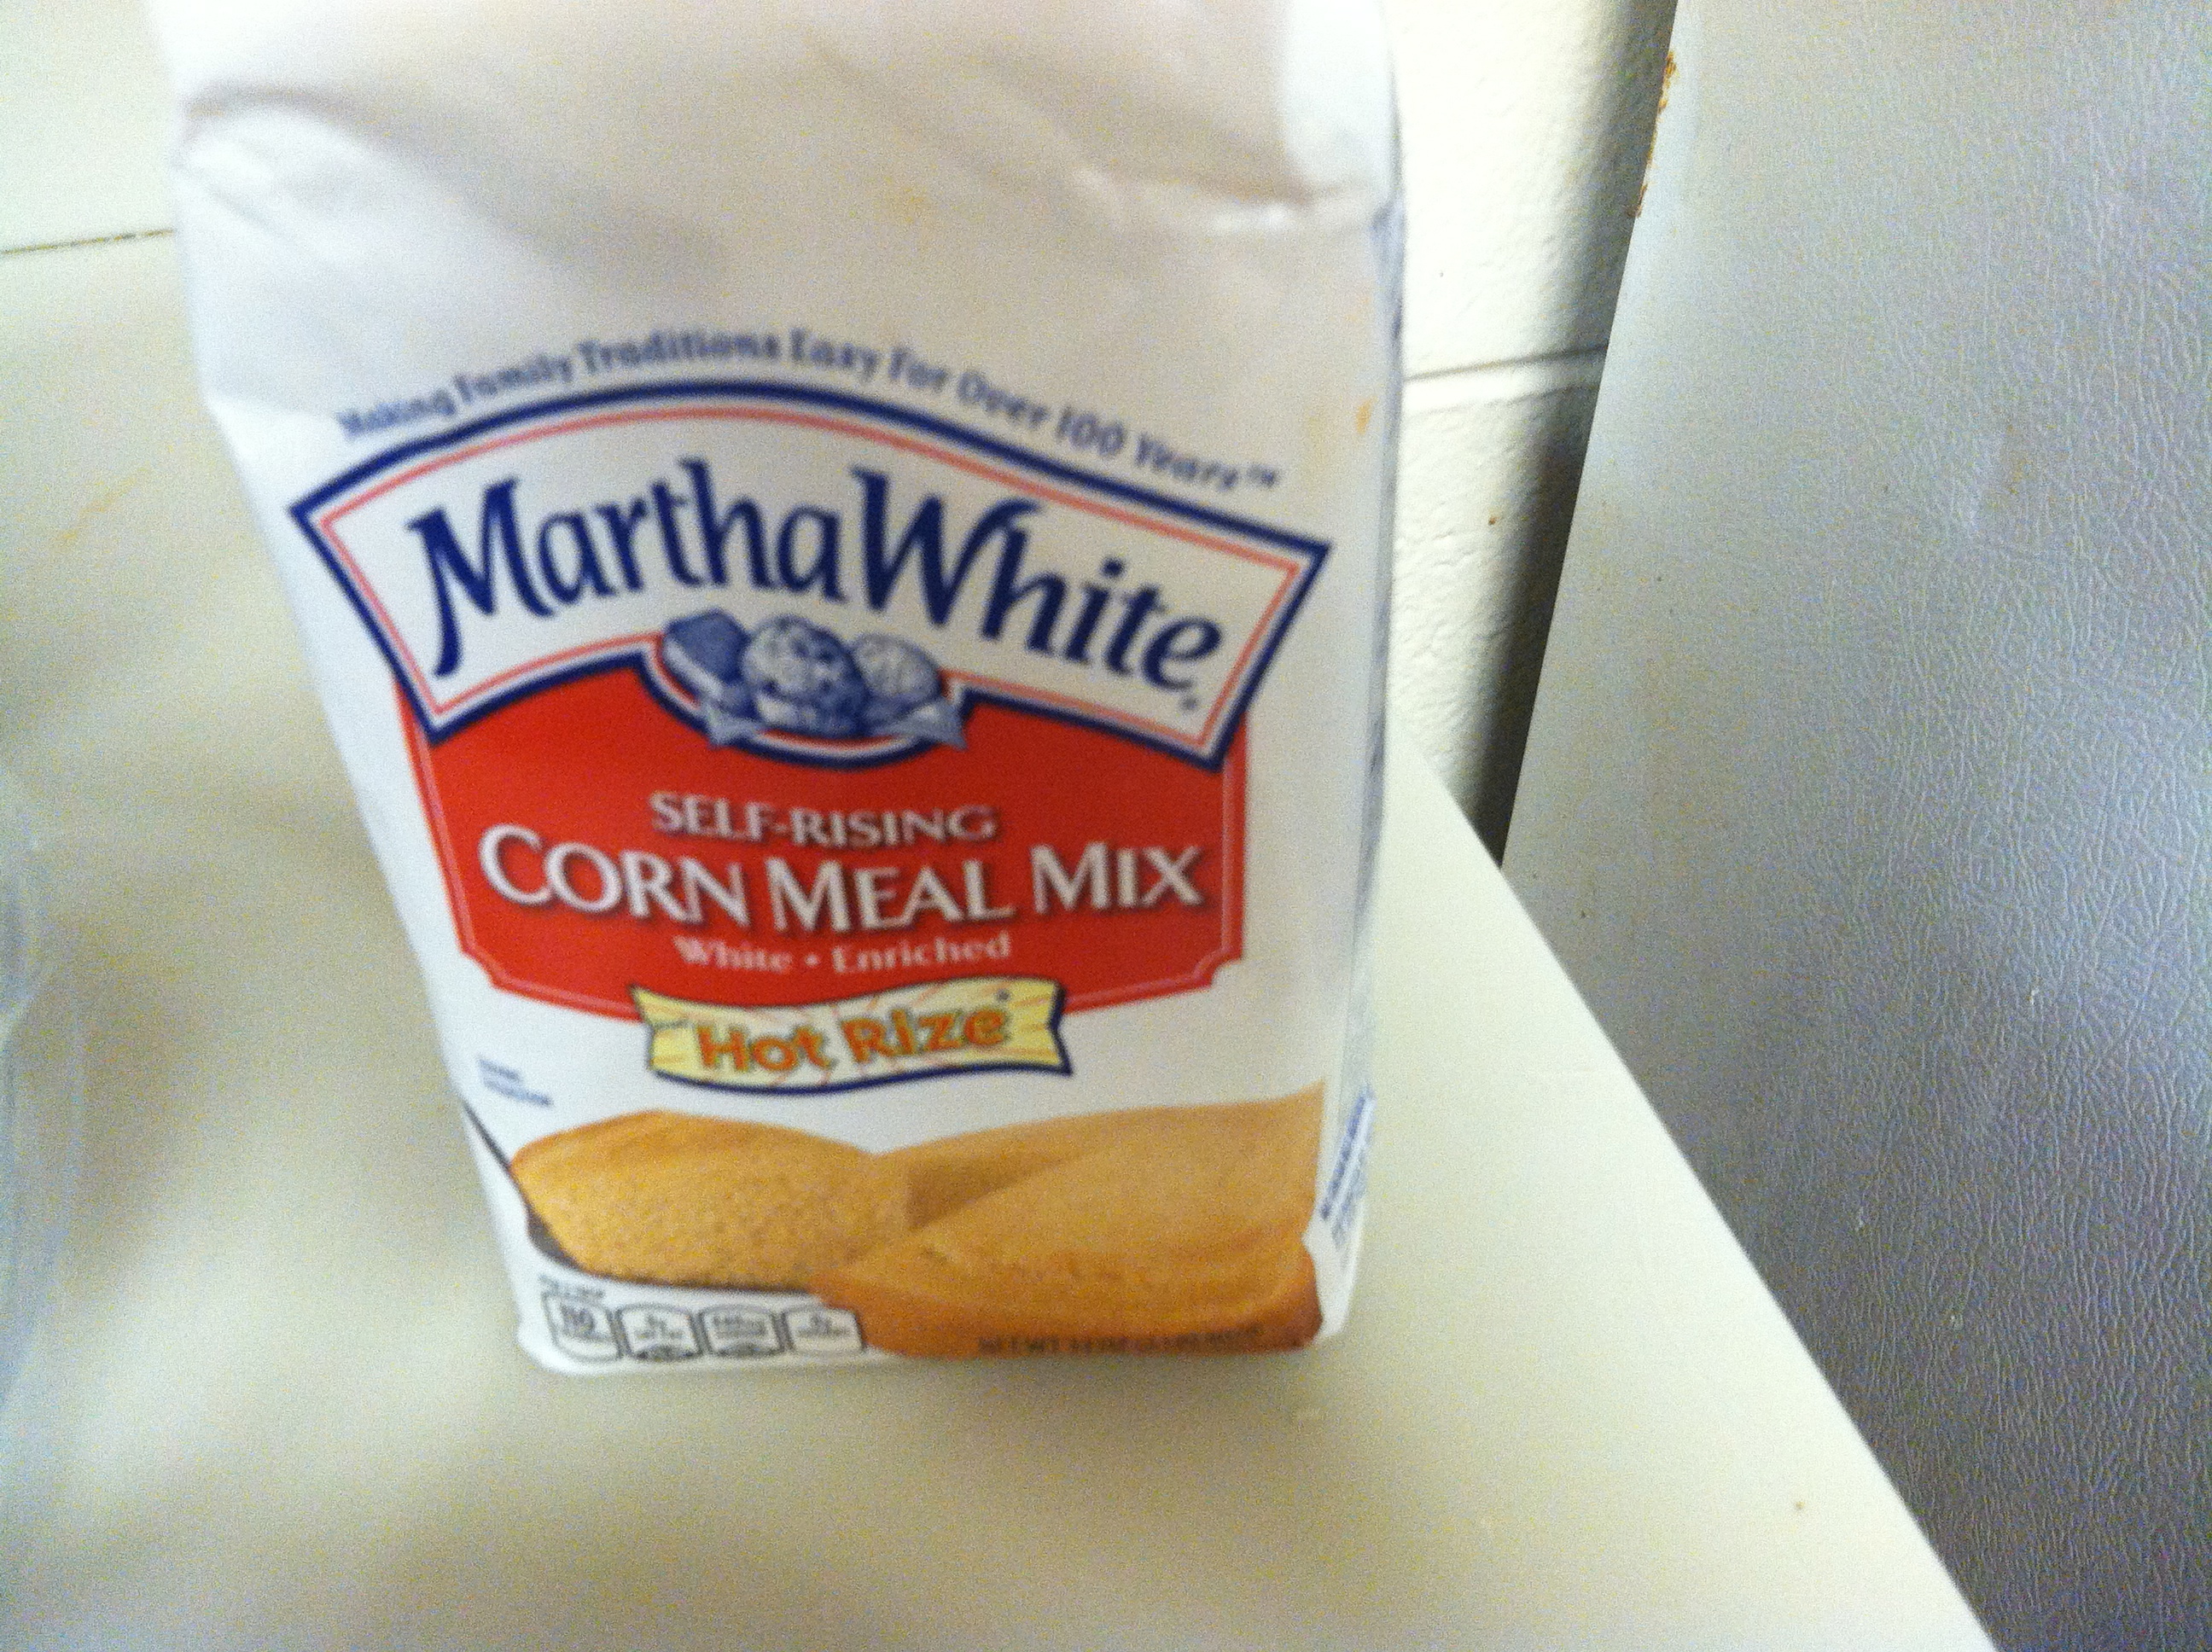 Still not sure if cornmeal and cornstarch are the same thing